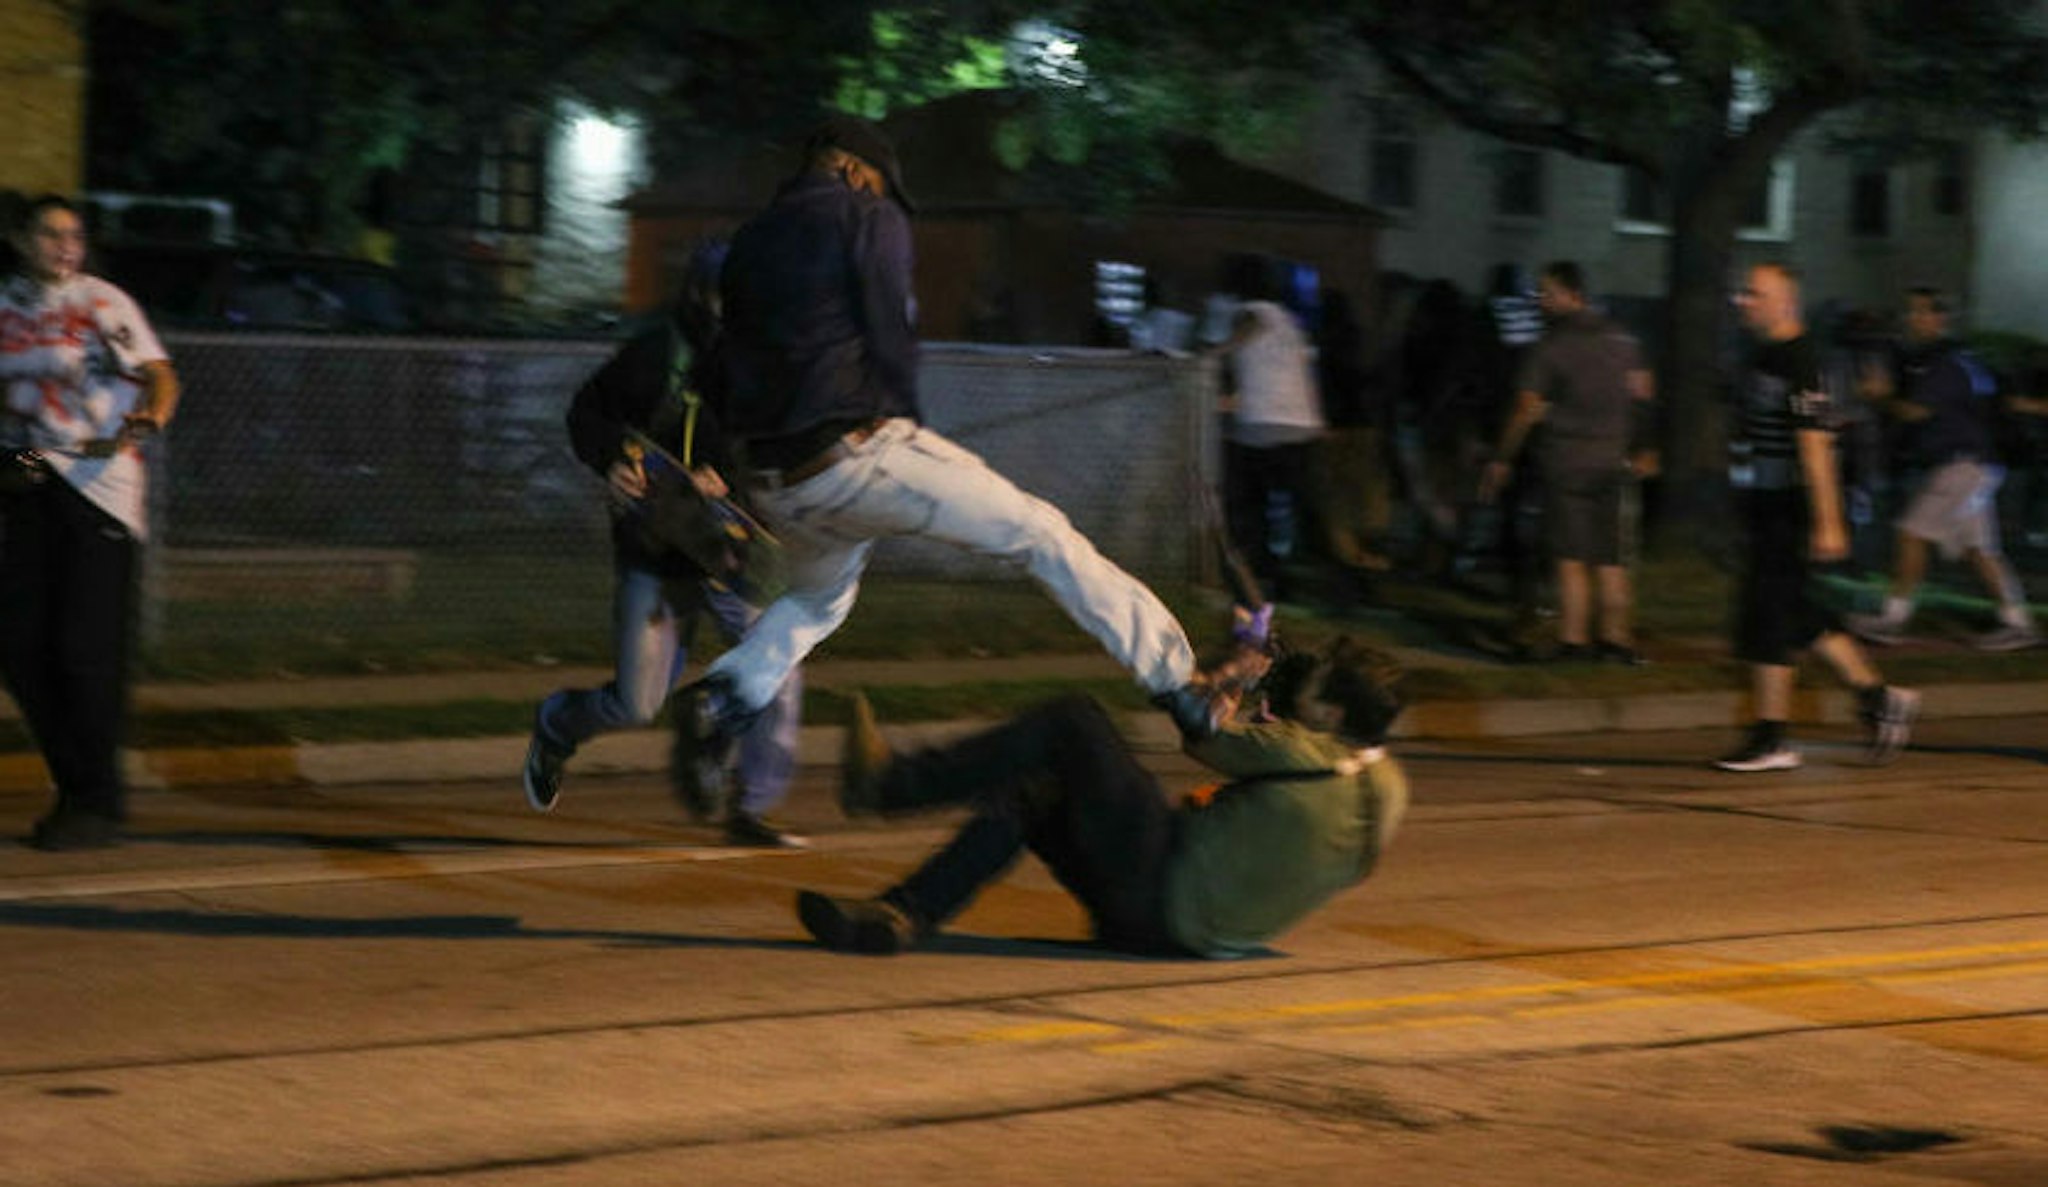 A protester clashes with armed civilian Kyle Rittenhouse during confrontations between protesters and armed civilians, who claimed to protect the streets of Kenosha against the arson, during the third day of protests over the shooting of a black man Jacob Blake by police officer in Wisconsin, United States on August 25, 2020.